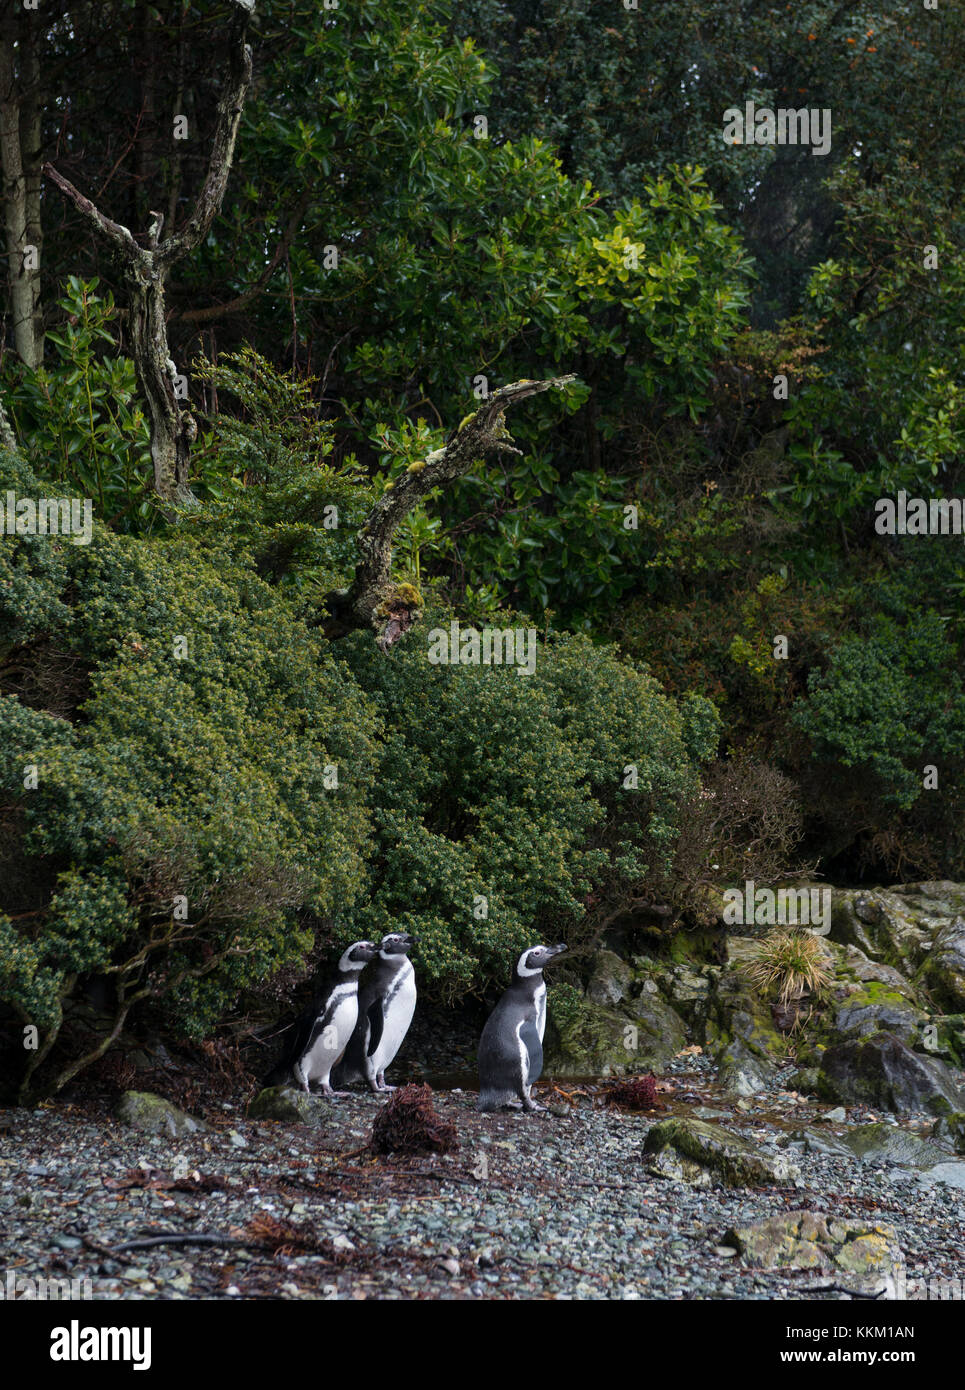 Magellanic Penguins near their breeding colony on an island in southern Chile Stock Photo